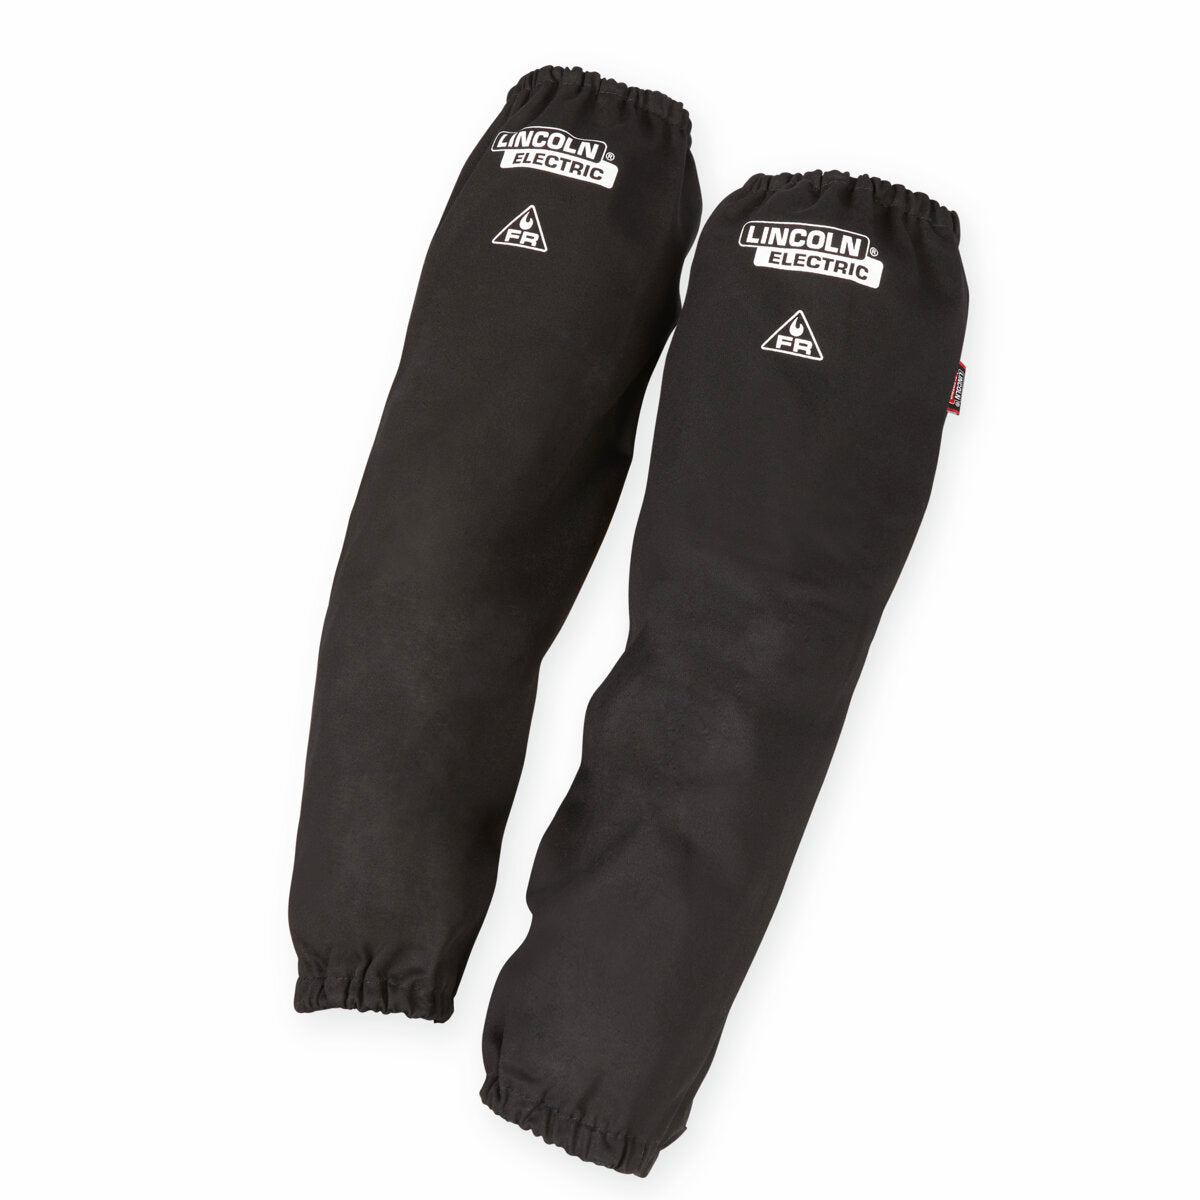 Lincoln Electric K4827-ALL Traditional Flame Retardant Cotton Welding Sleeves - 21 in.